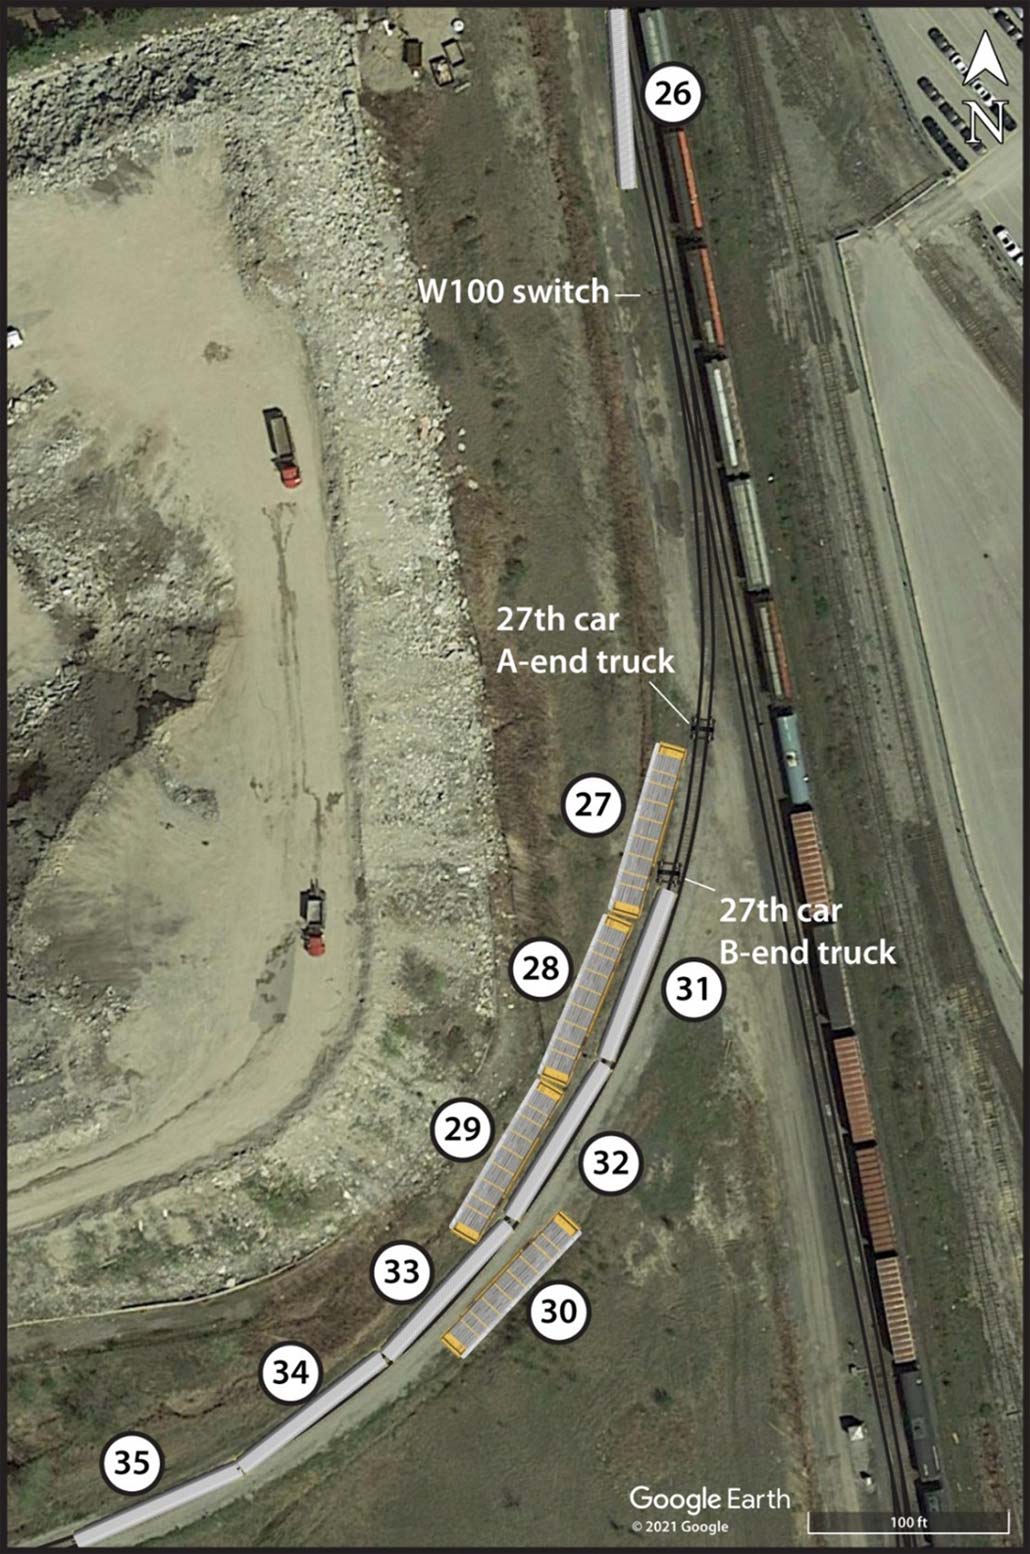 Location of derailed cars (Source: Google Earth, with TSB annotations)